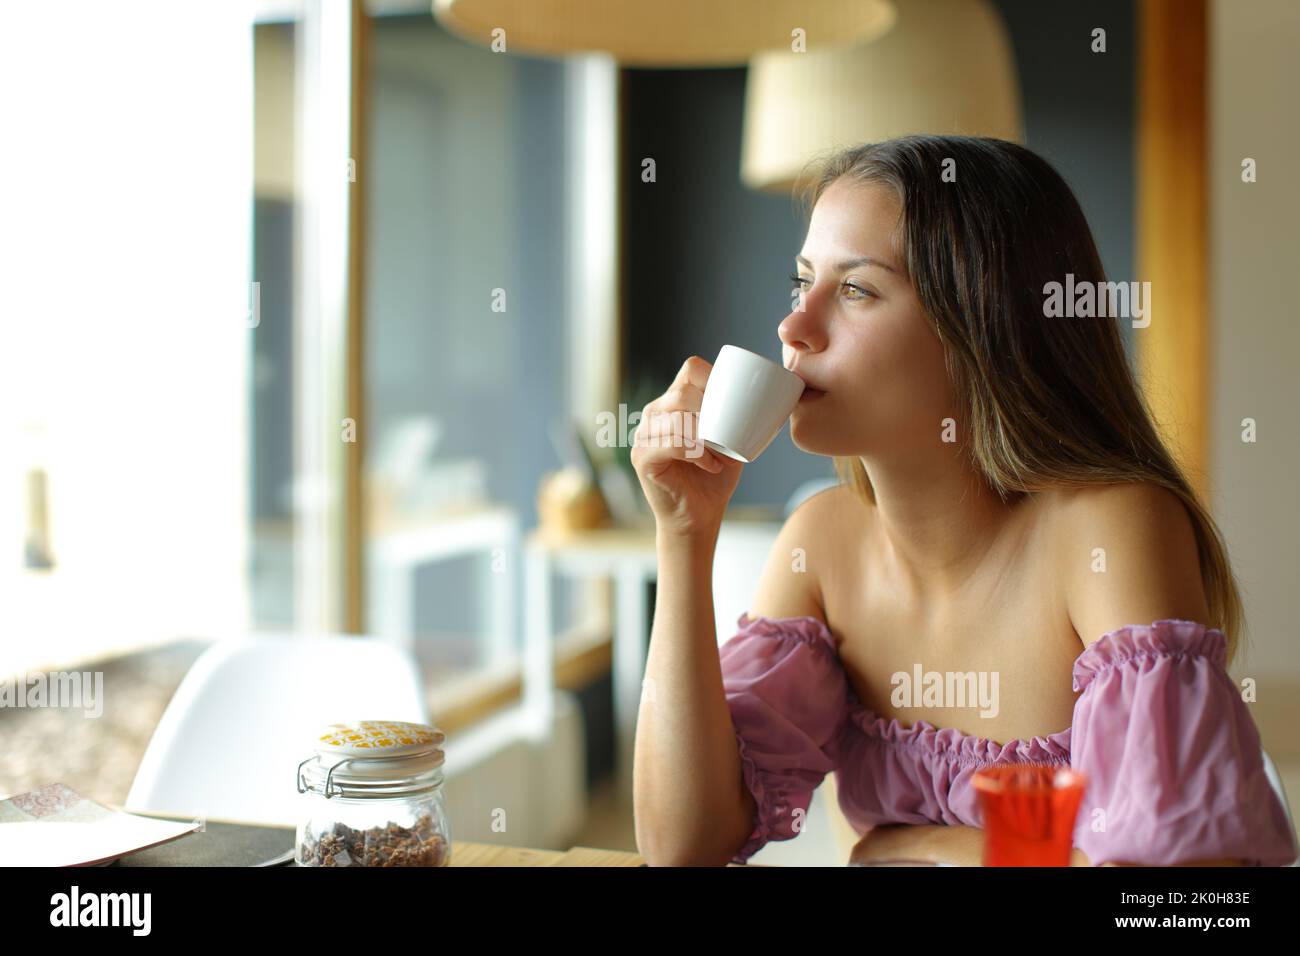 Young woman drinking coffee looking thtough a window in a restaurant Stock Photo